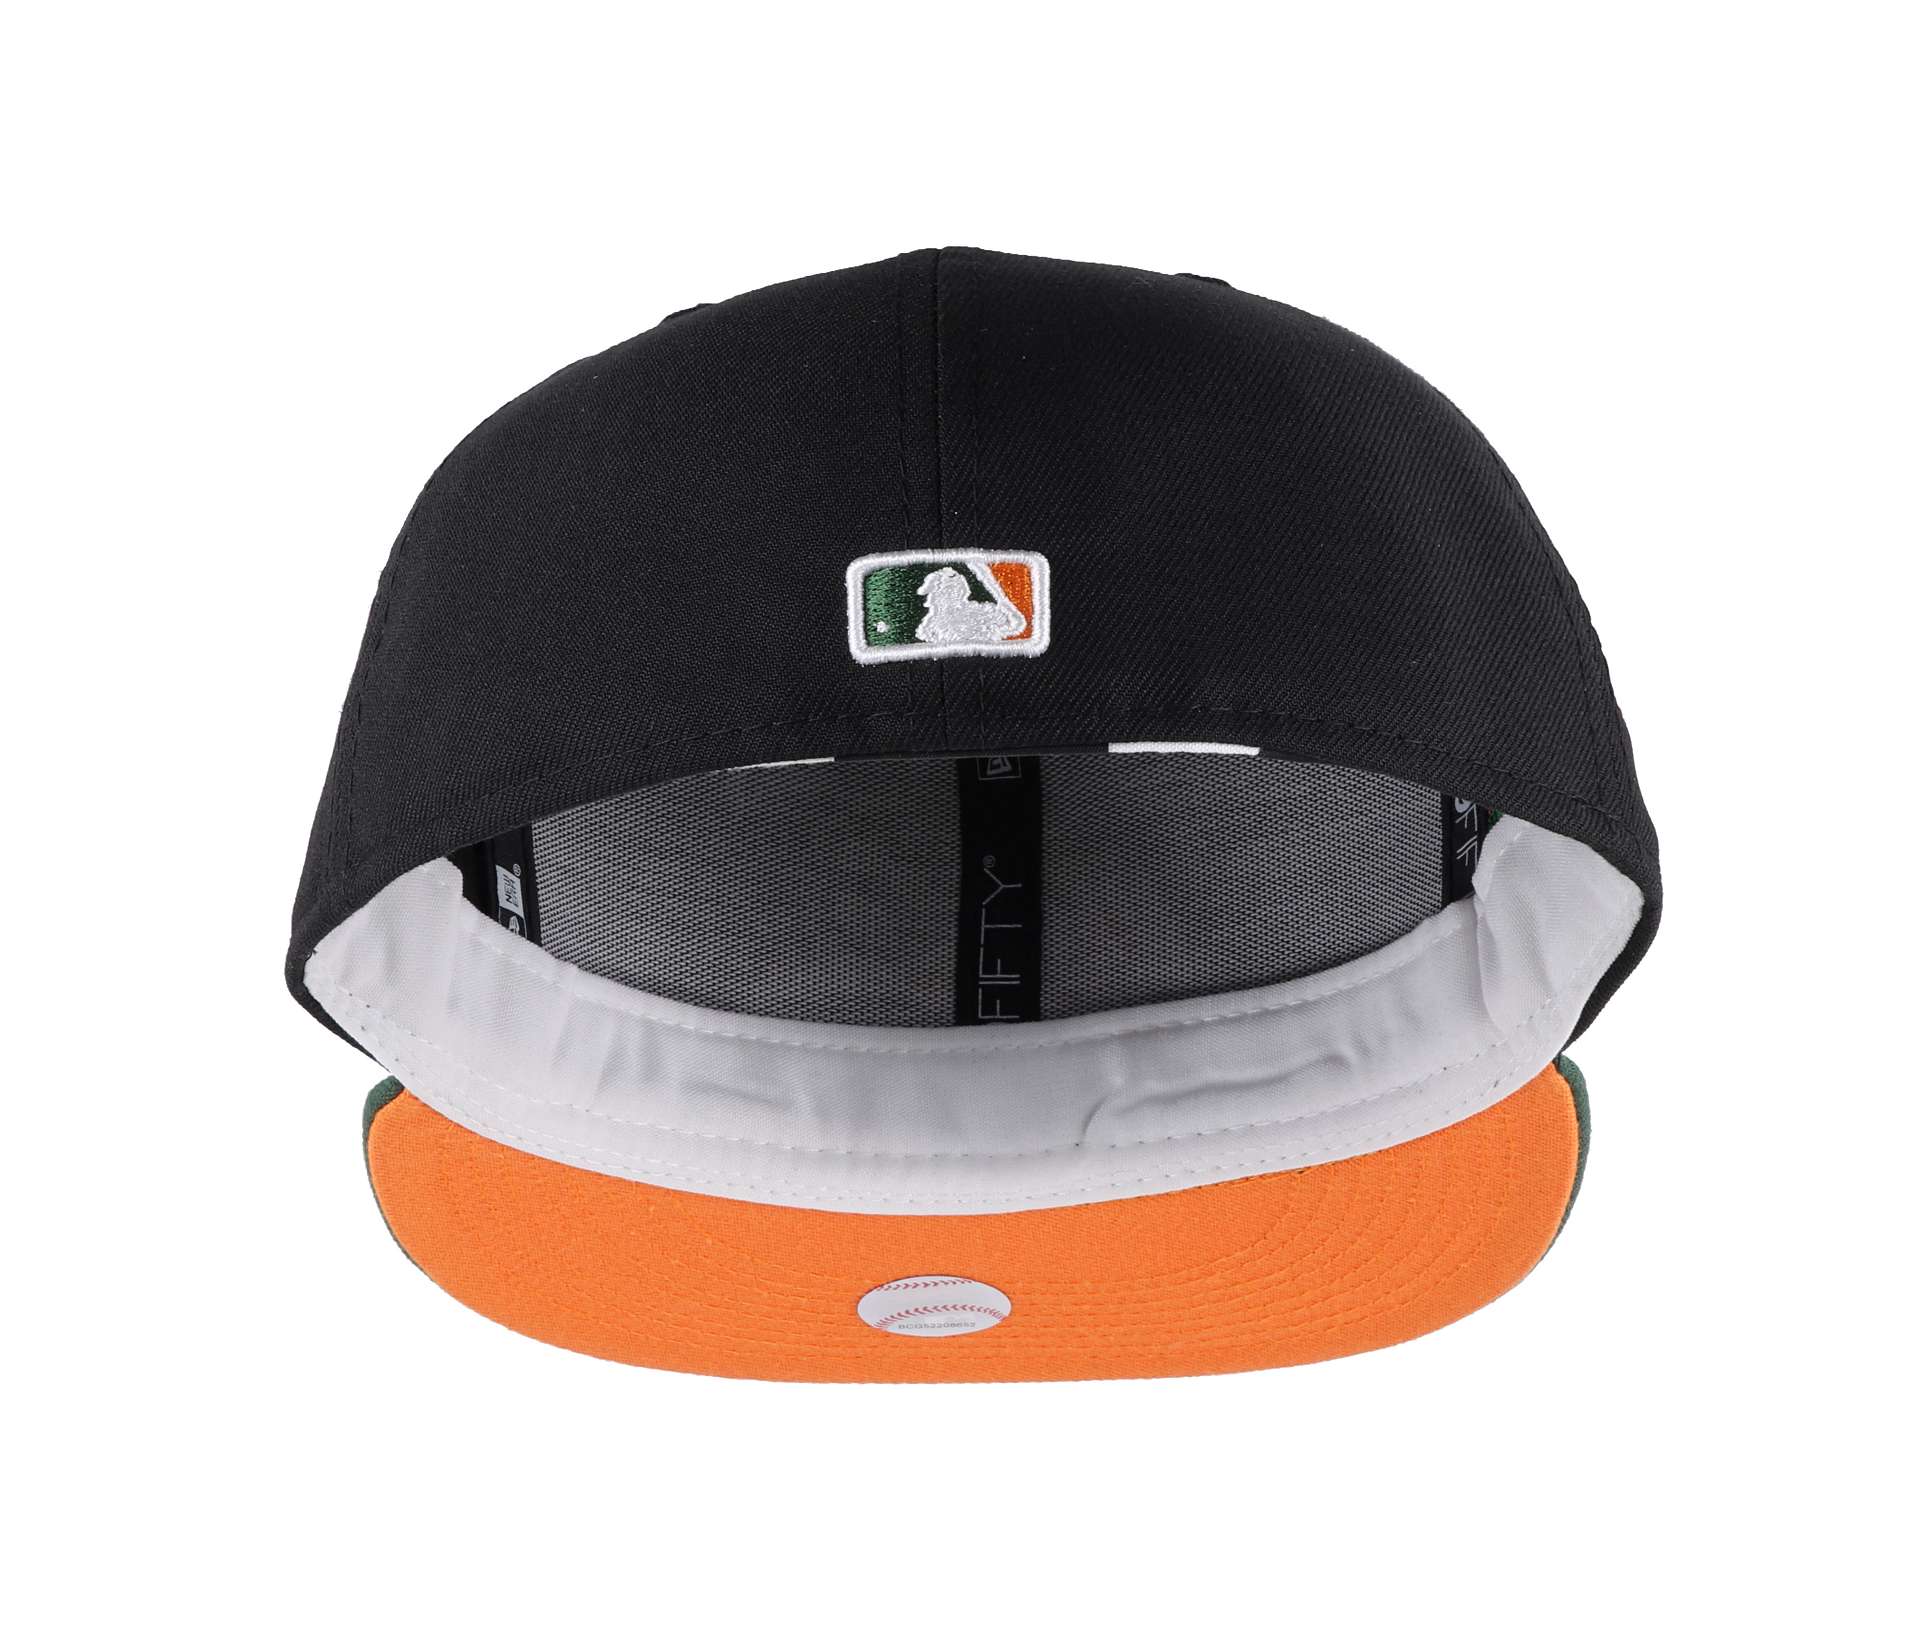 Colorado Rockies MLB Sidepatch All-Star Game 2021 Two-Tone Black Green 59Fifty Basecap New Era